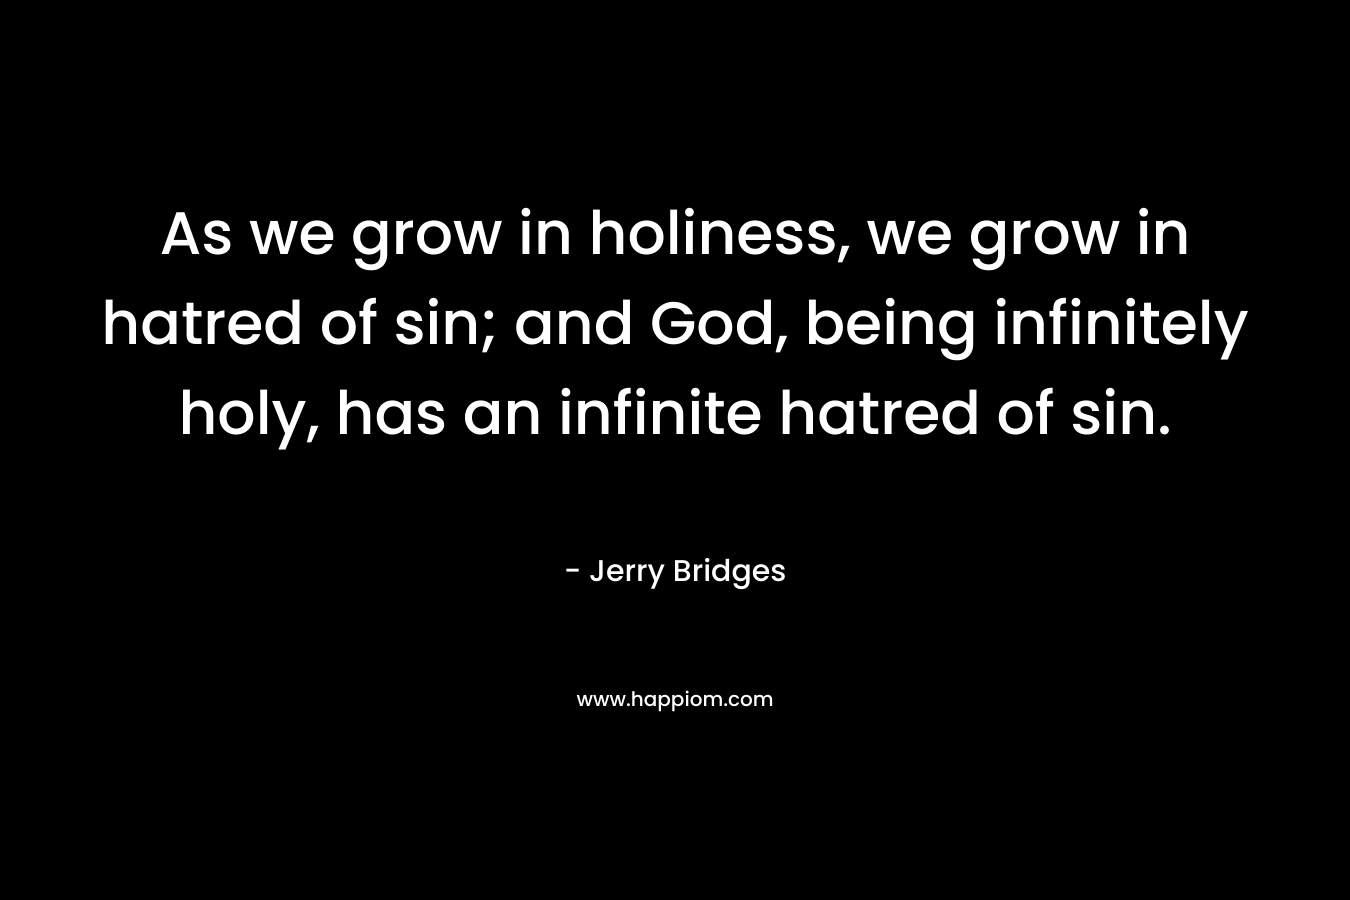 As we grow in holiness, we grow in hatred of sin; and God, being infinitely holy, has an infinite hatred of sin. – Jerry Bridges